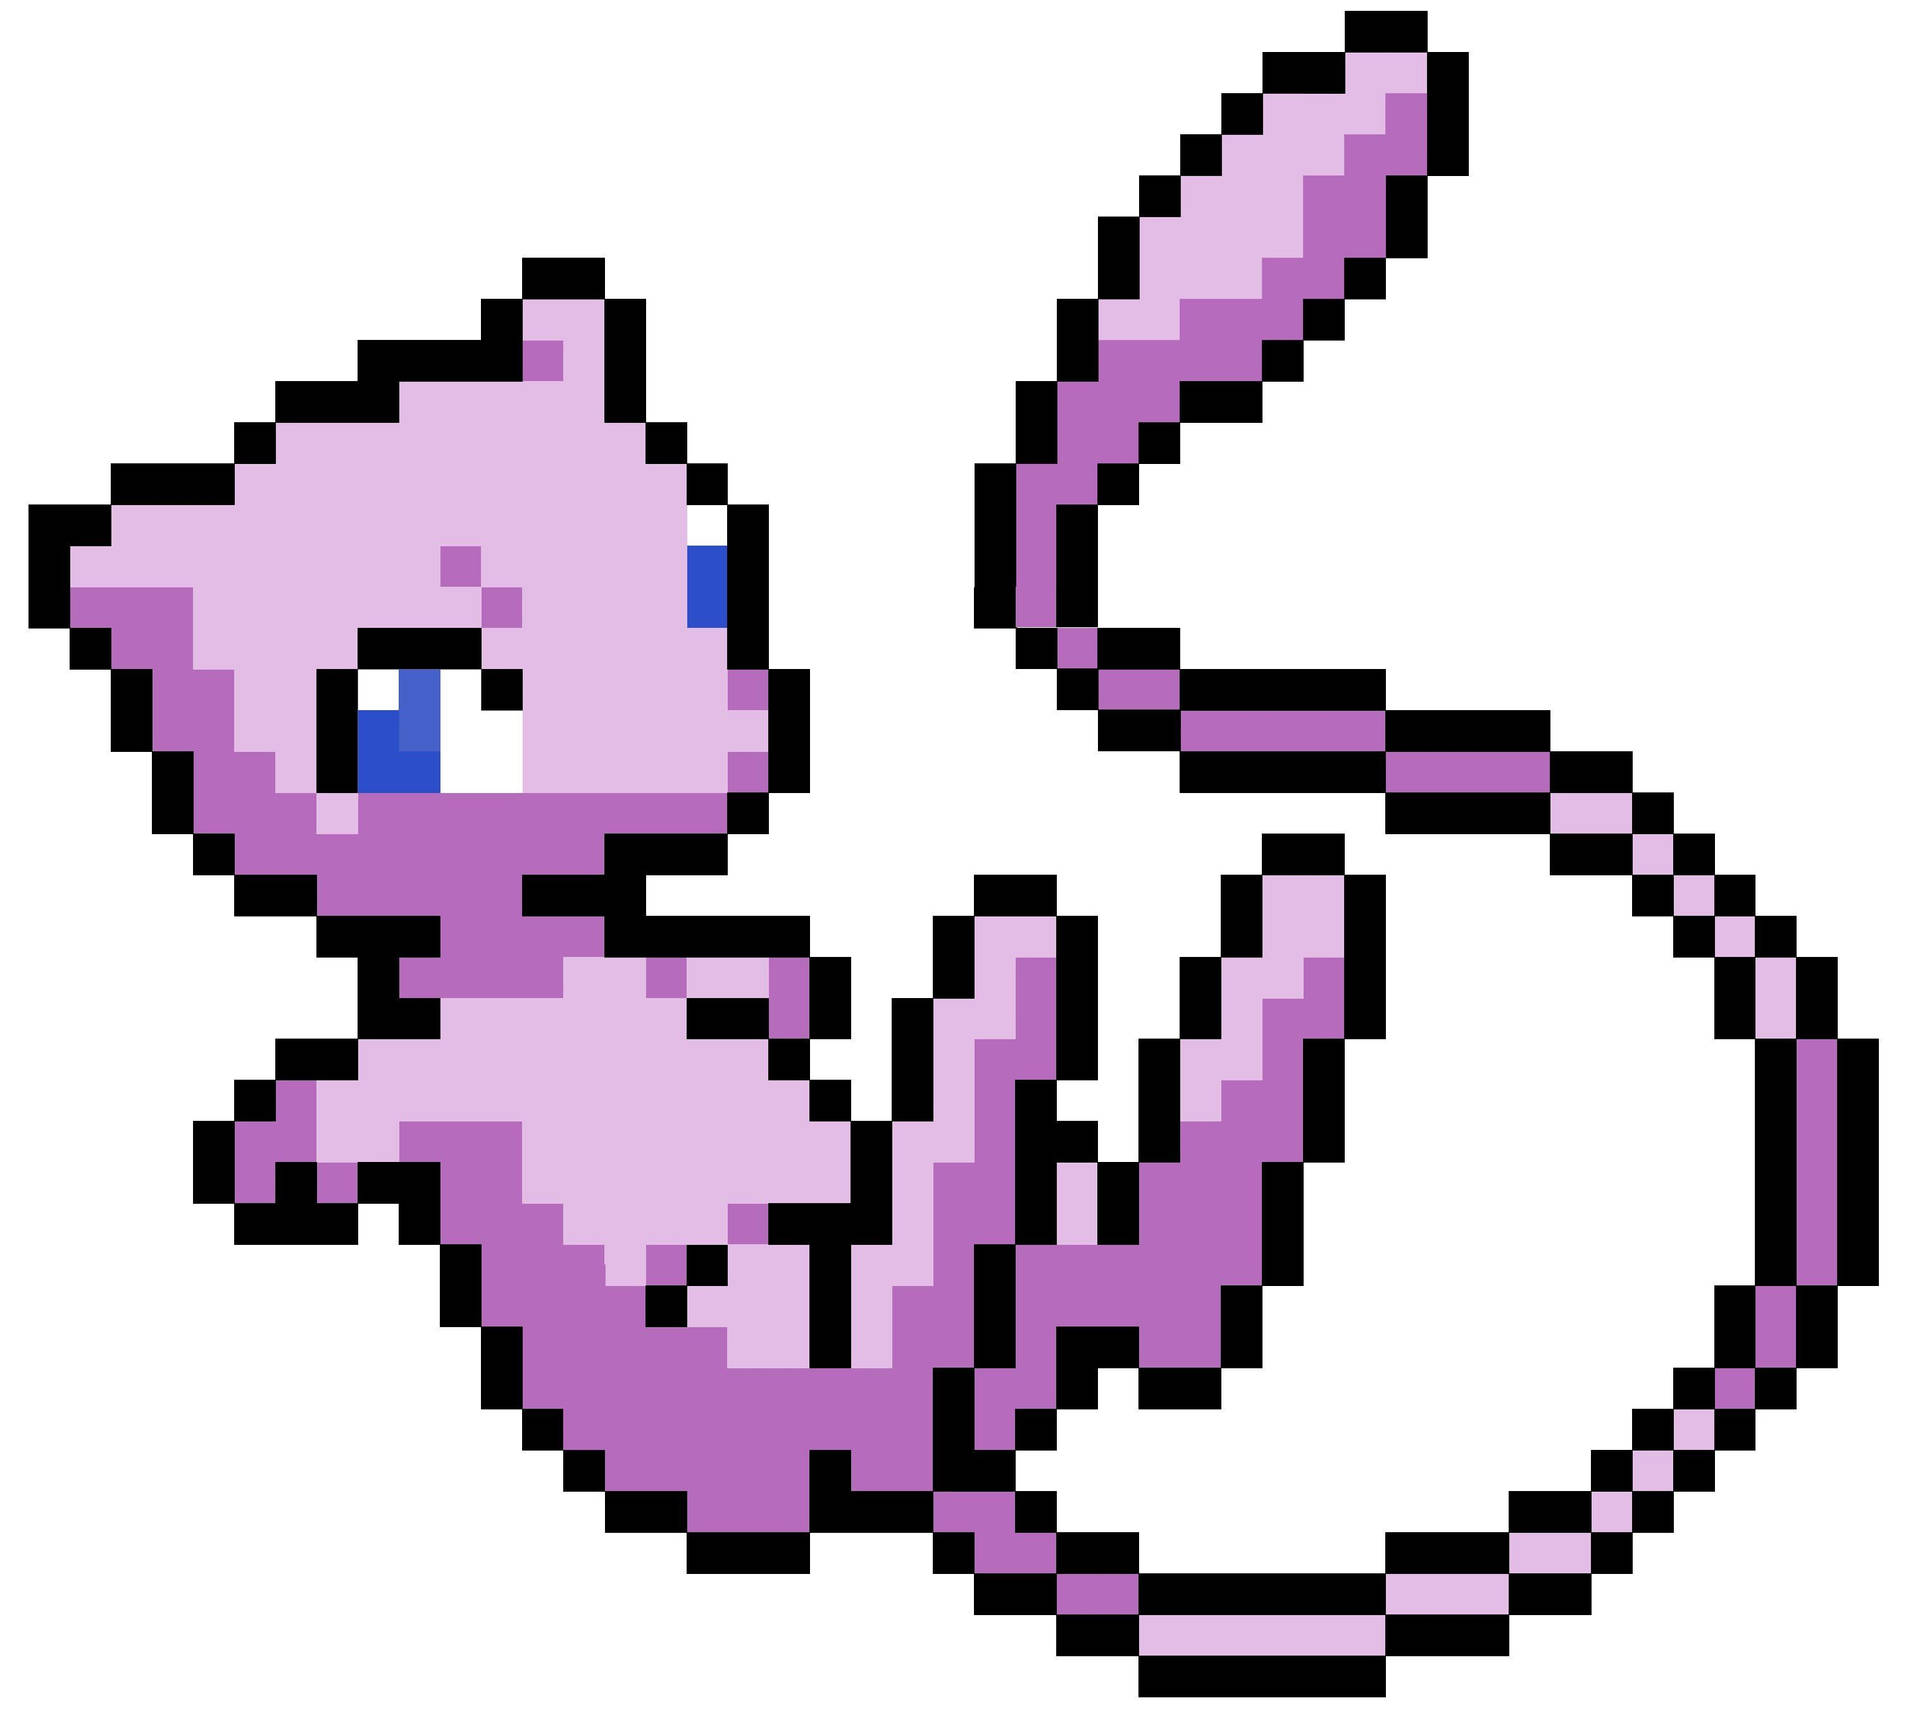 Mew 3034X2735 Wallpaper and Background Image